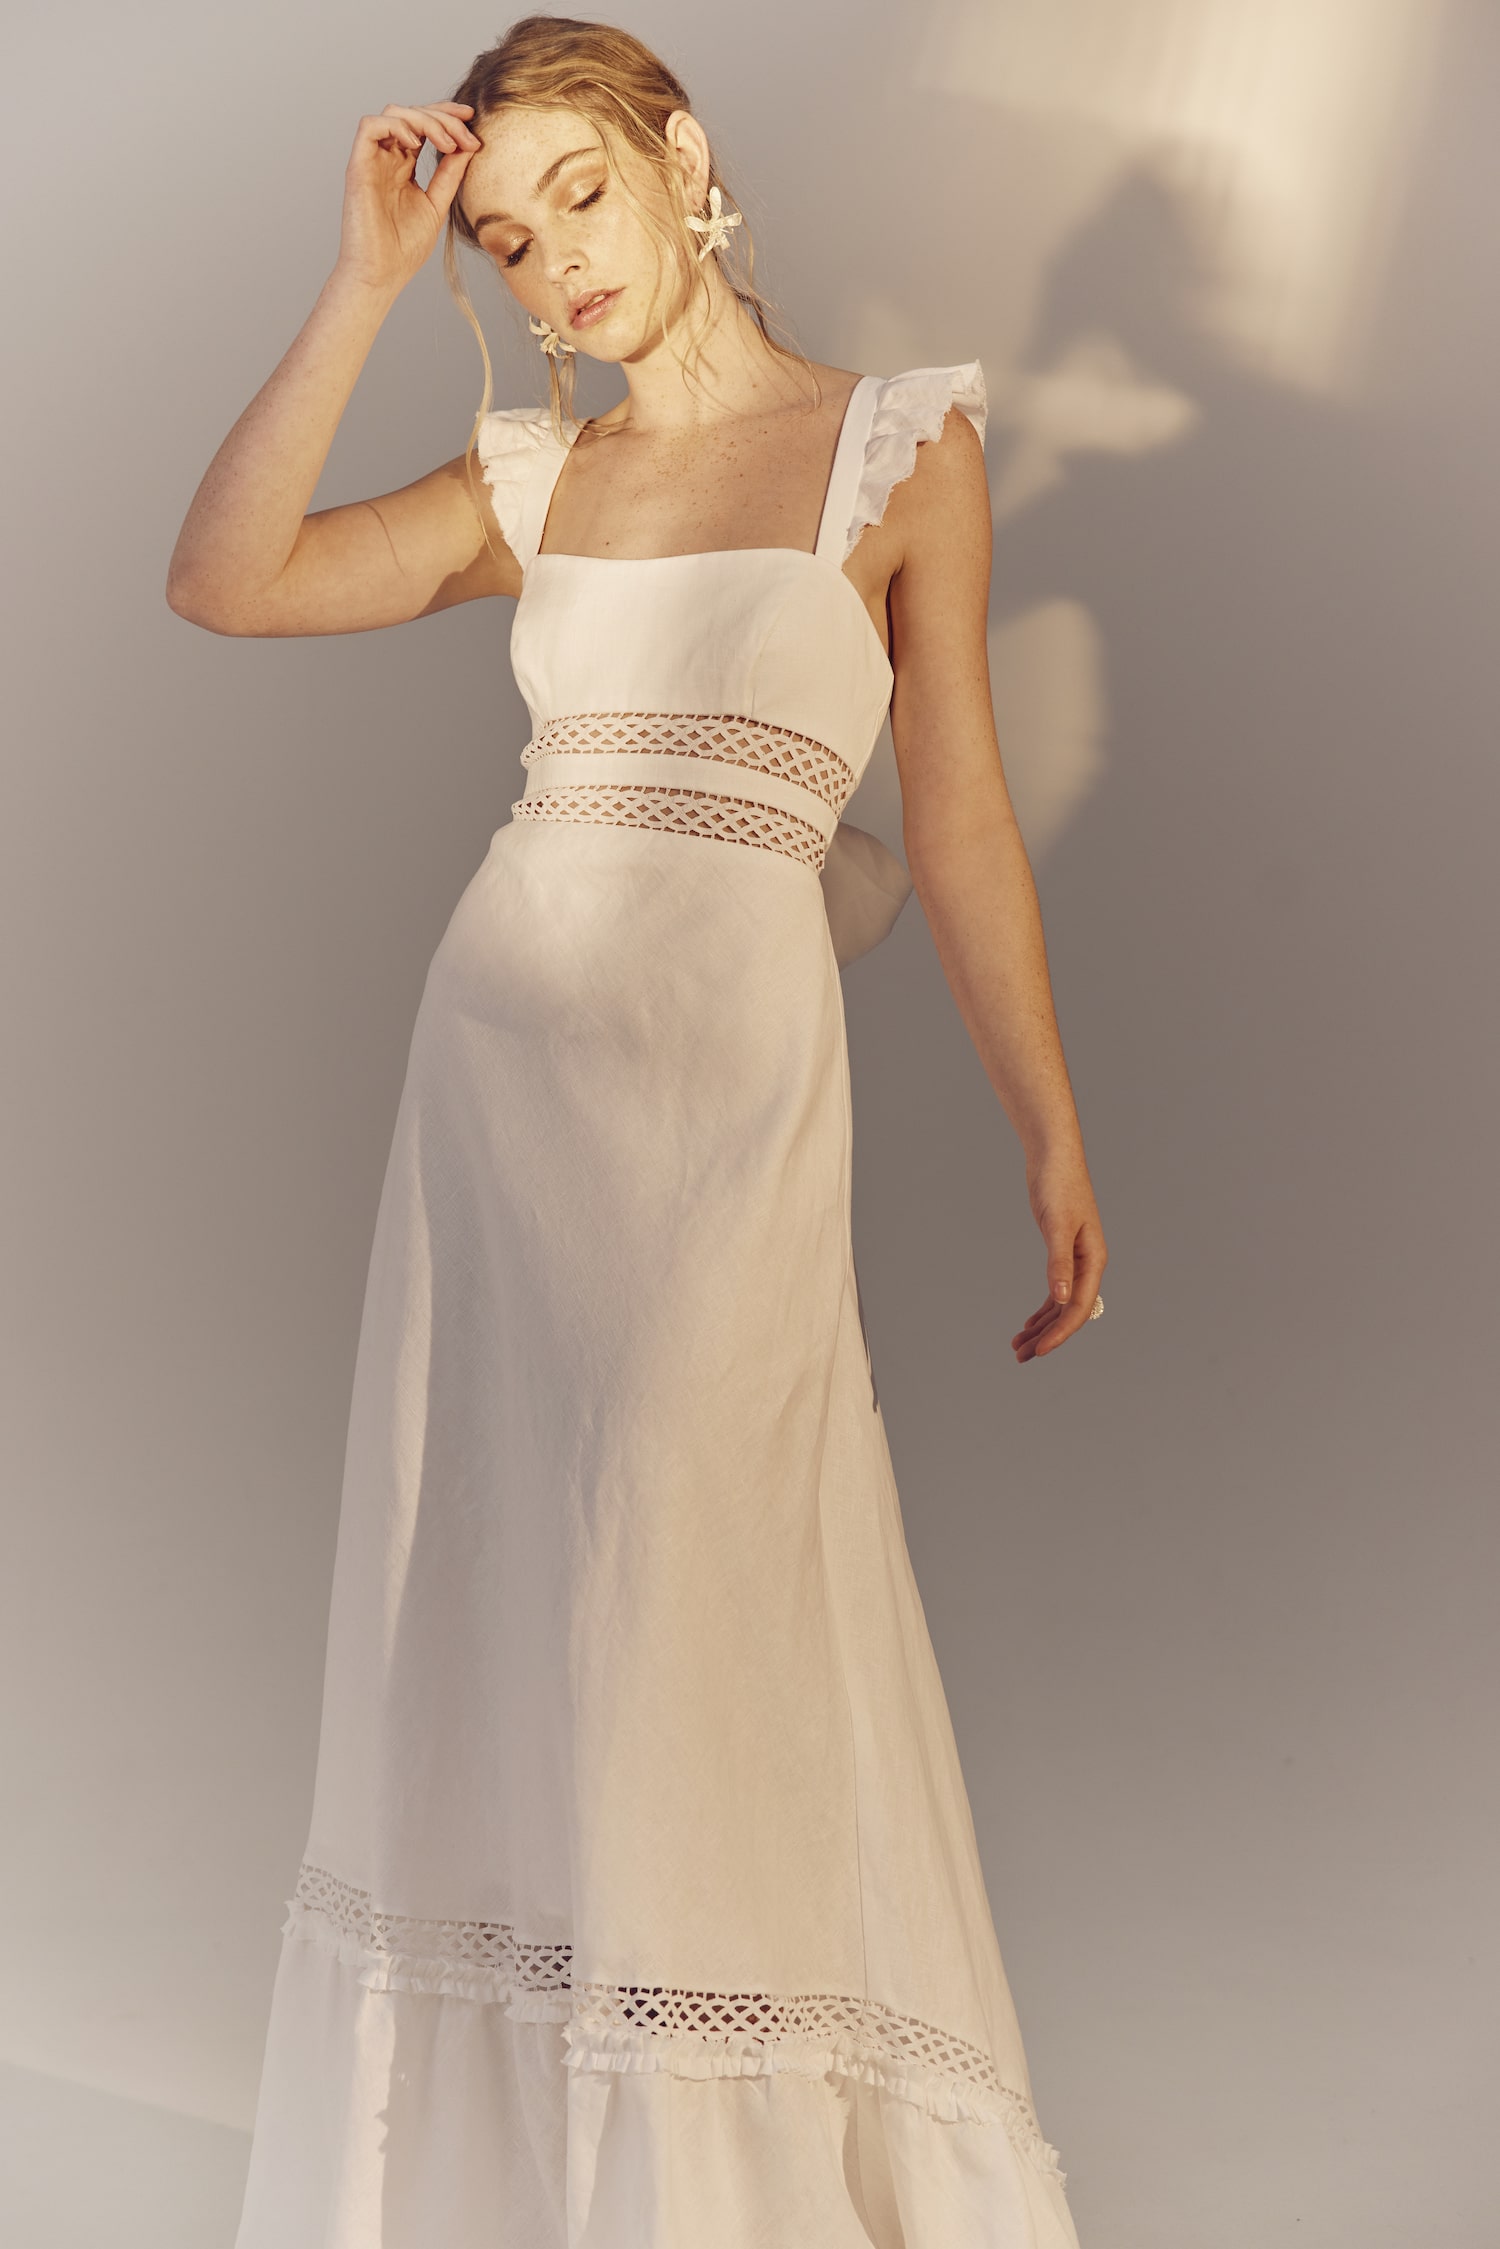 Maggie full length - a square neckline white linen gown with frilly cap sleeves